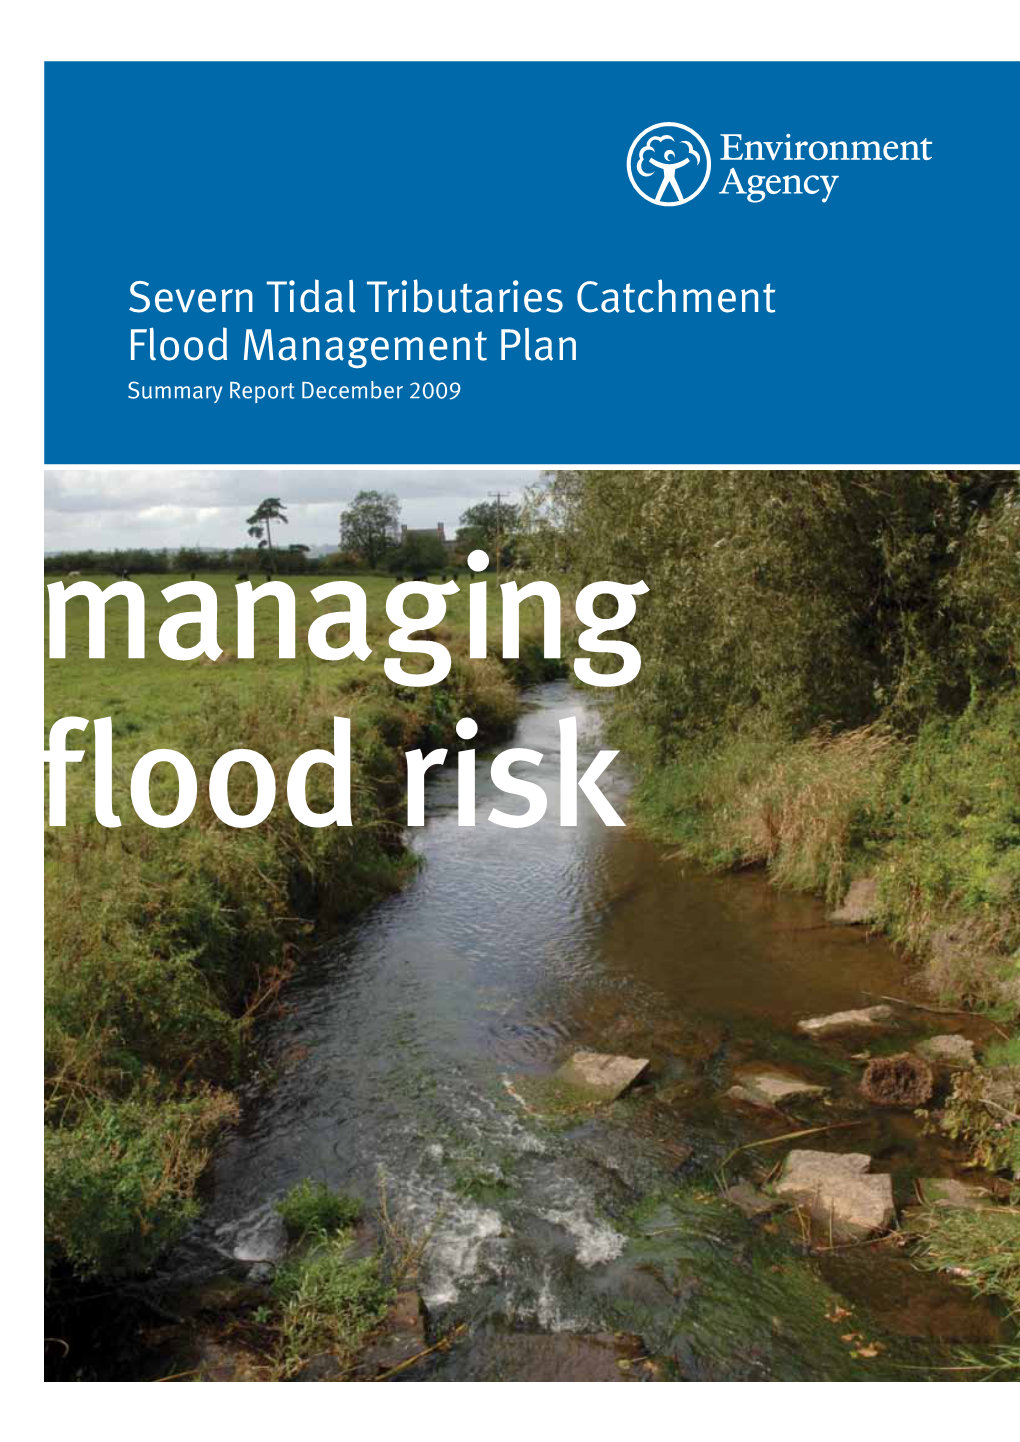 Severn Tidal Tributaries Catchment Flood Management Plan Summary Report December 2009 Managing Flood Risk We Are the Environment Agency